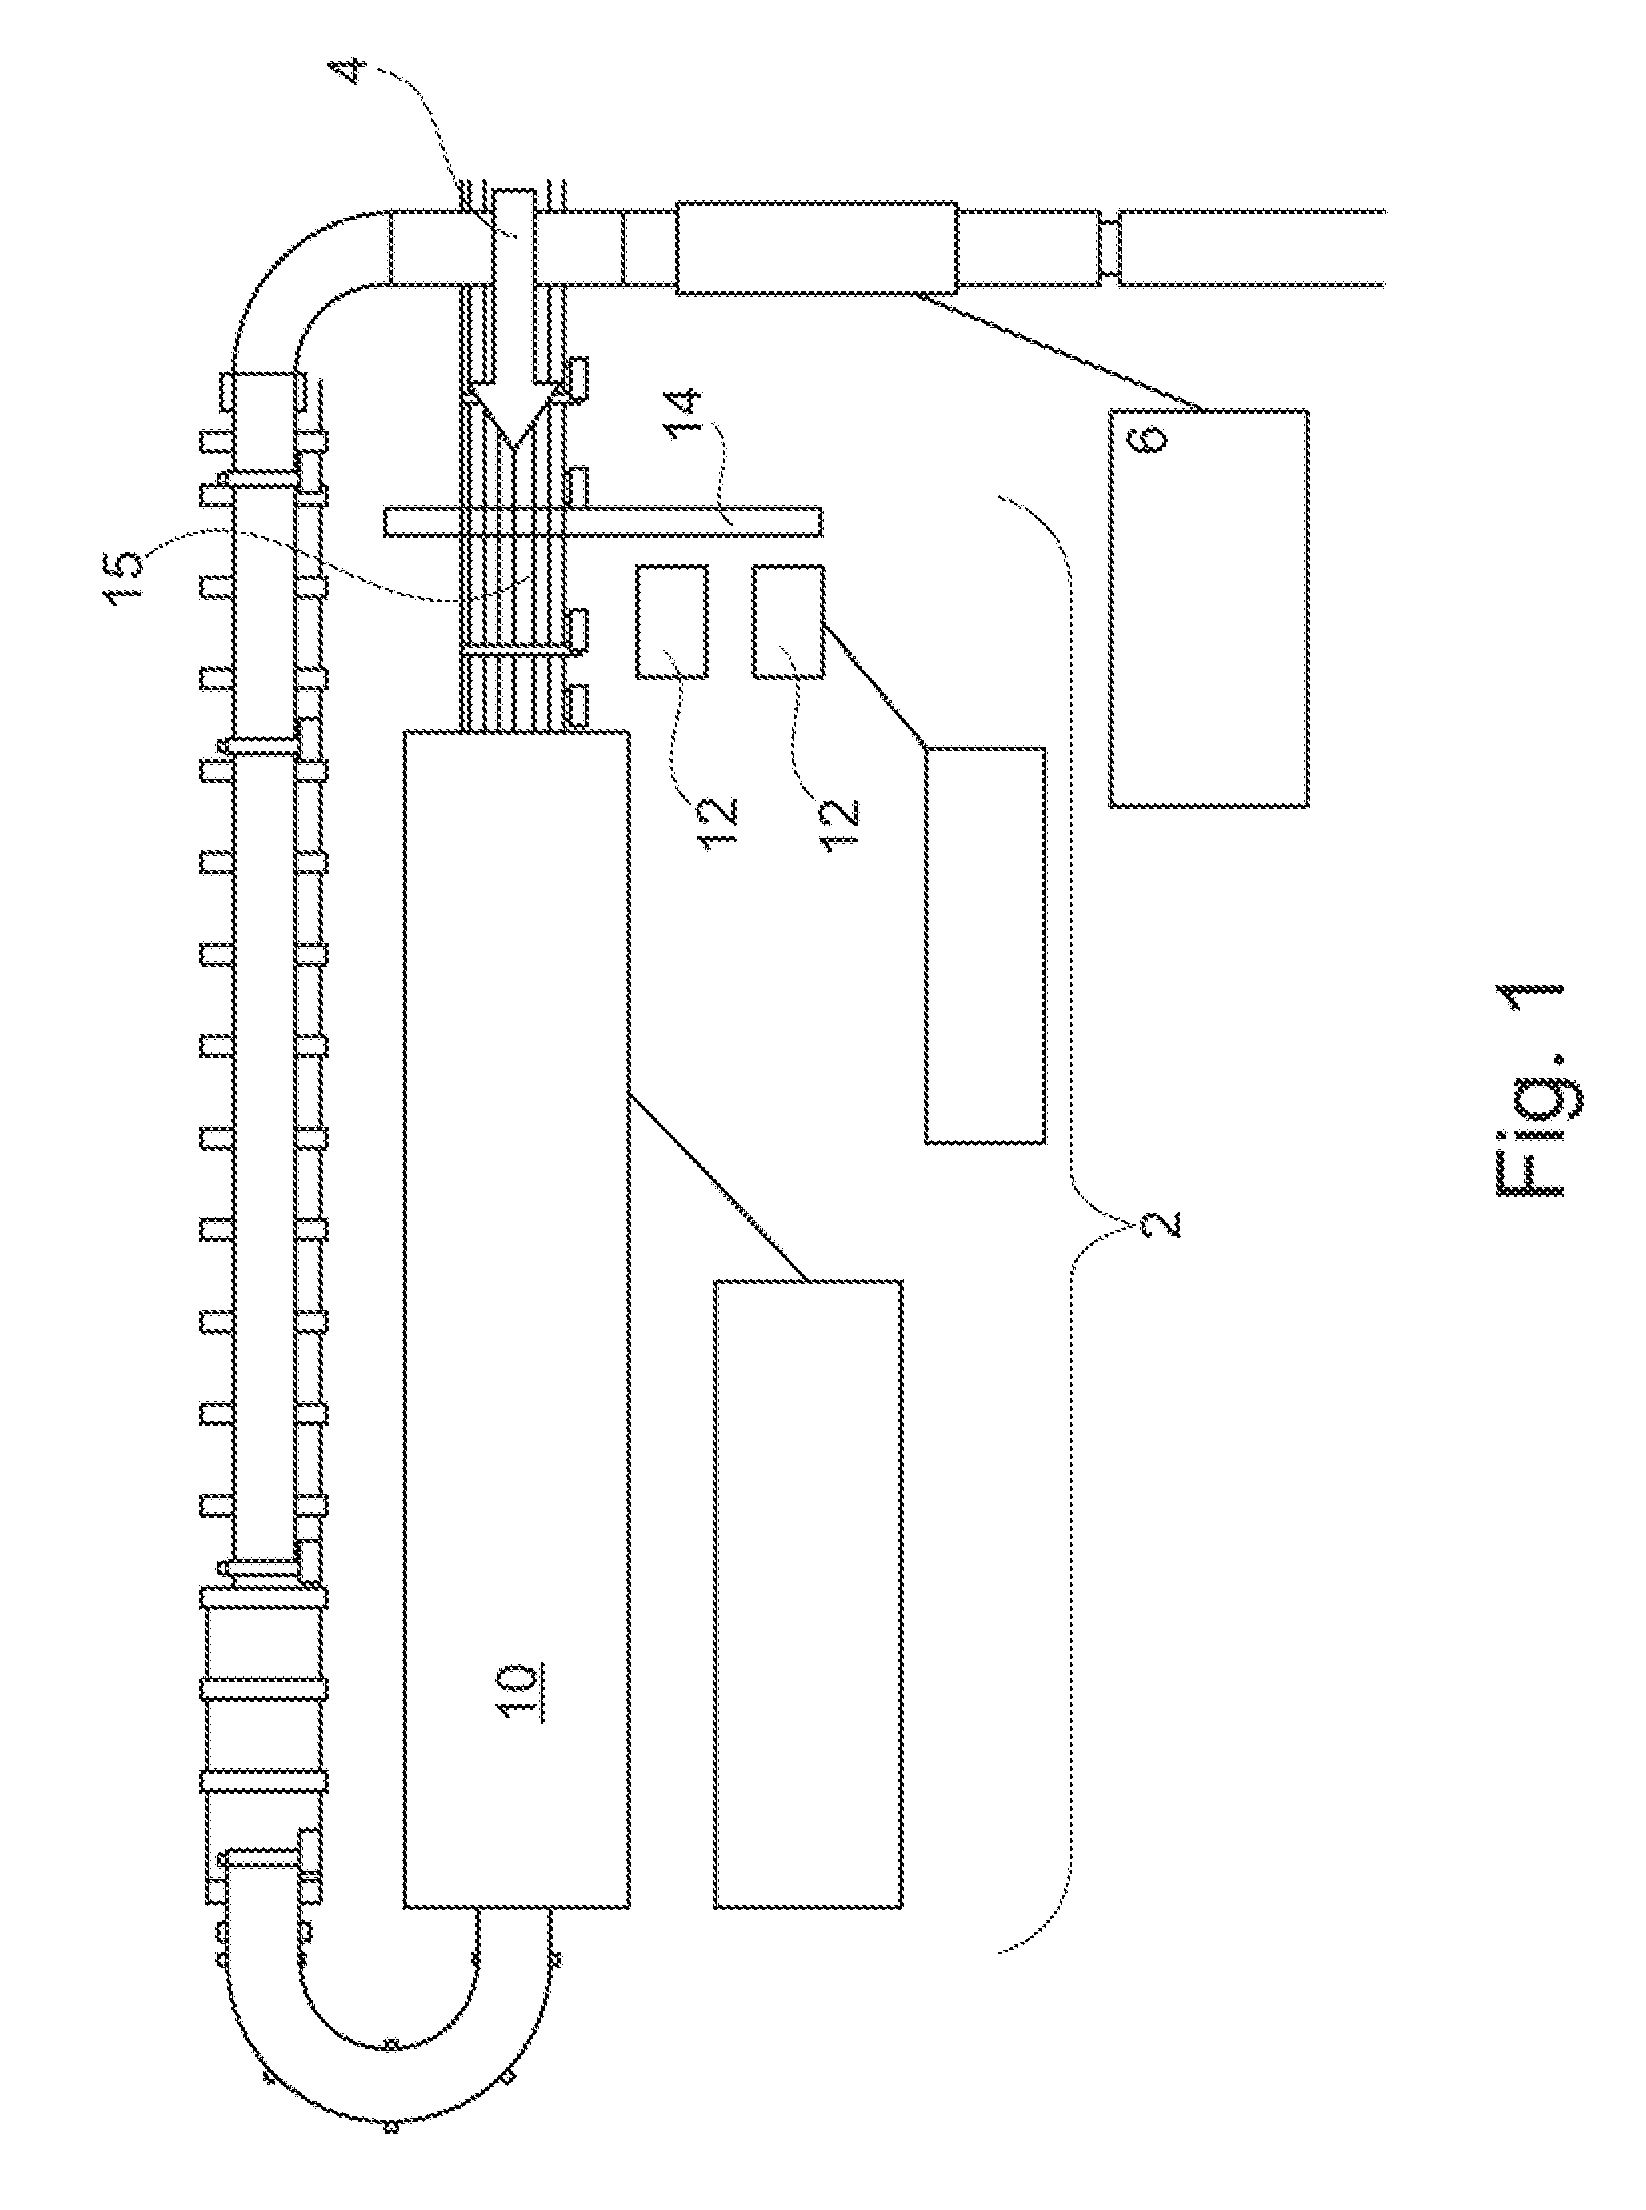 Apparatus and method for making packs of at least two containers for beverages